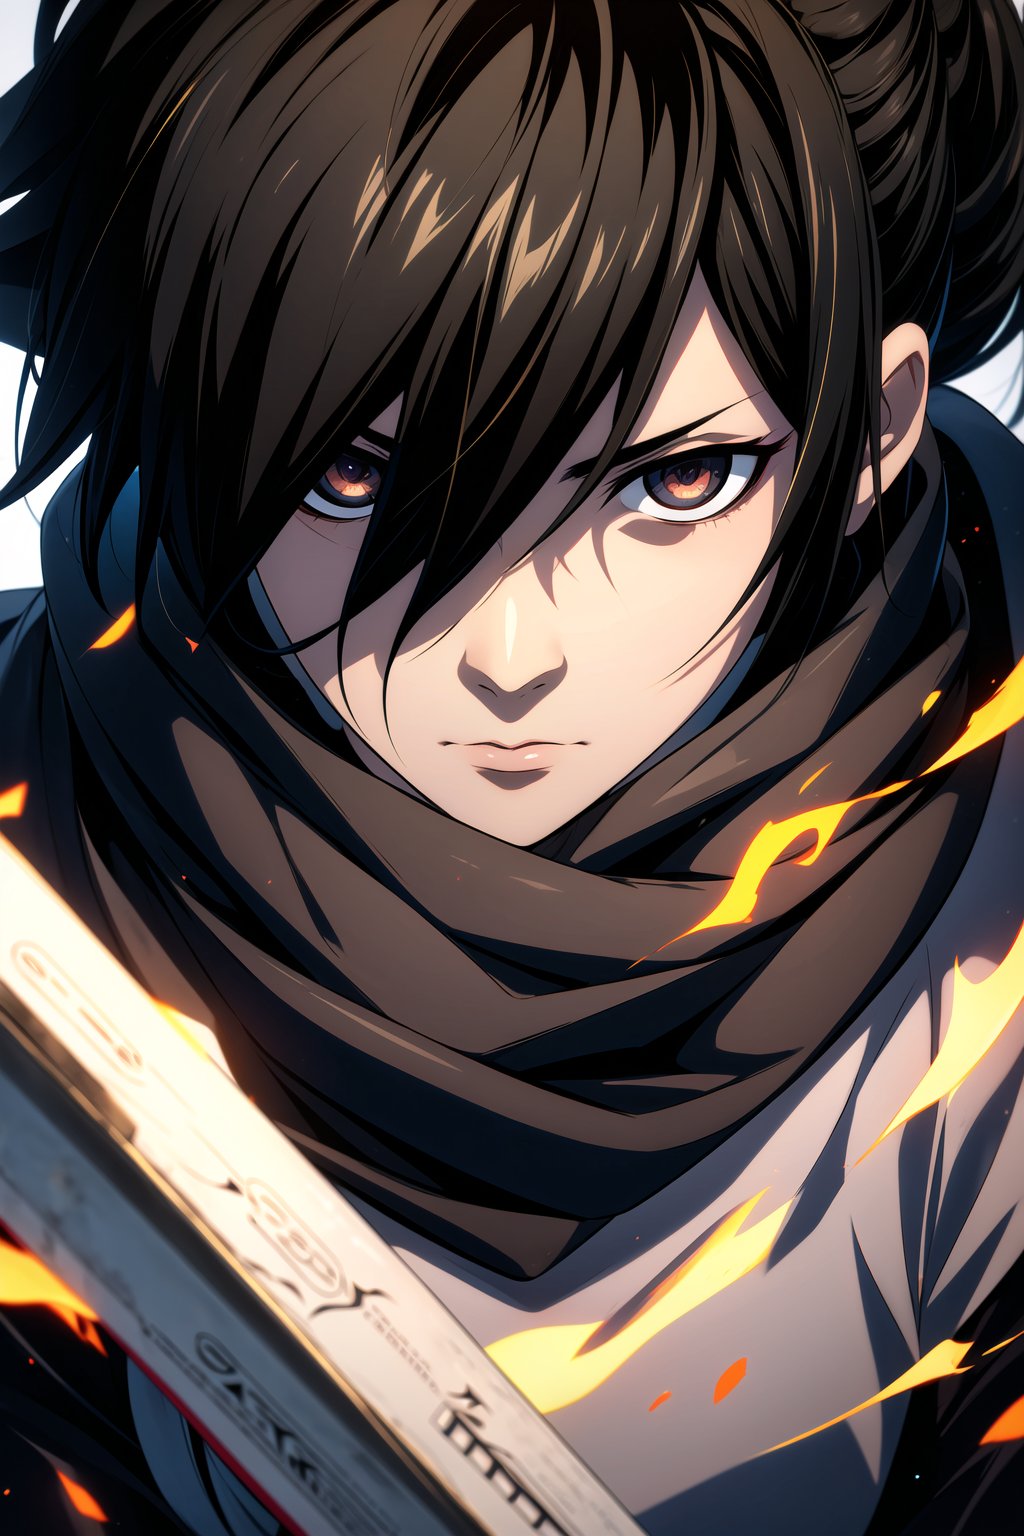 best quality, masterpiece, highres, masterpiece,best quality,1male,strong,solo,alone,ronin,sengoku_era,short ponytail hair,black_hair,japanese armor,samurai,extremely detailed eyes,black eyes,expression eyes,hollow eyes,glowing eyes, pale_skin, black scarf,souma_kyou, detailed eyes, light_particles, dust_particles, flying ashes,raging flames, wind blowing, serious expression, hair_between_eyes, jewelry, closed_mouth, sharp focus, dramatic angle,portrait,looking_at_camera,(((close up face))), extreme close up shot, eyes shot, cinematic lighting, dramatic pose, dark background, face only,samurai,r1ge, beret,hyakkimaru_dororo, black hair